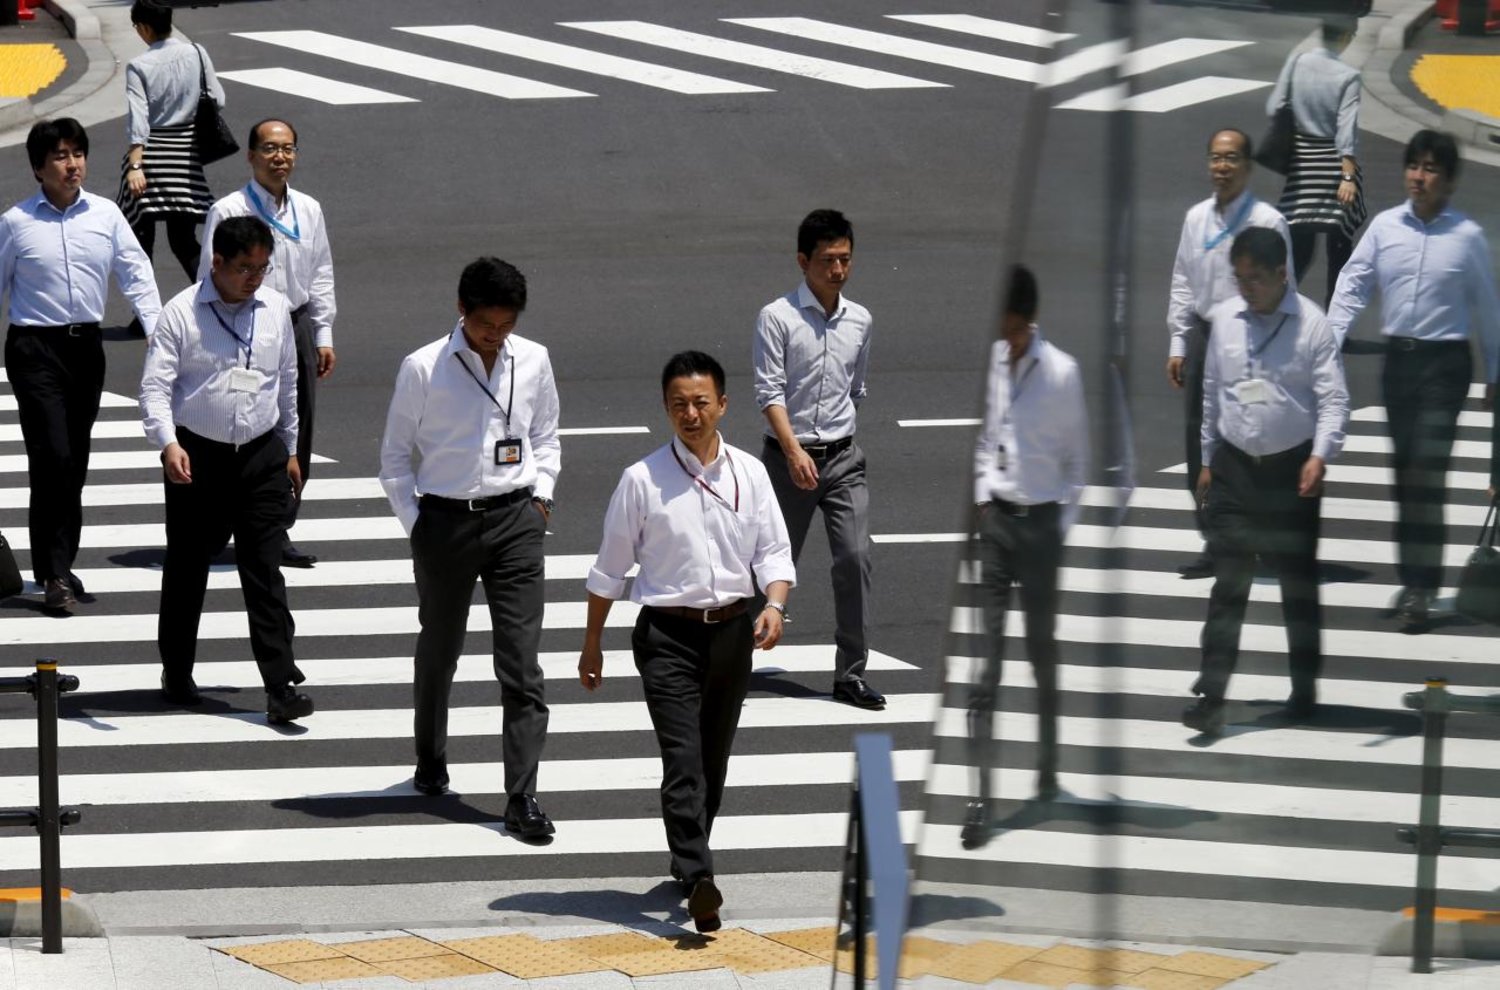 Office workers are reflected in a glass railing as they cross a street during lunch hour in Tokyo June 1, 2015. REUTERS/Thomas Peter/File Photo